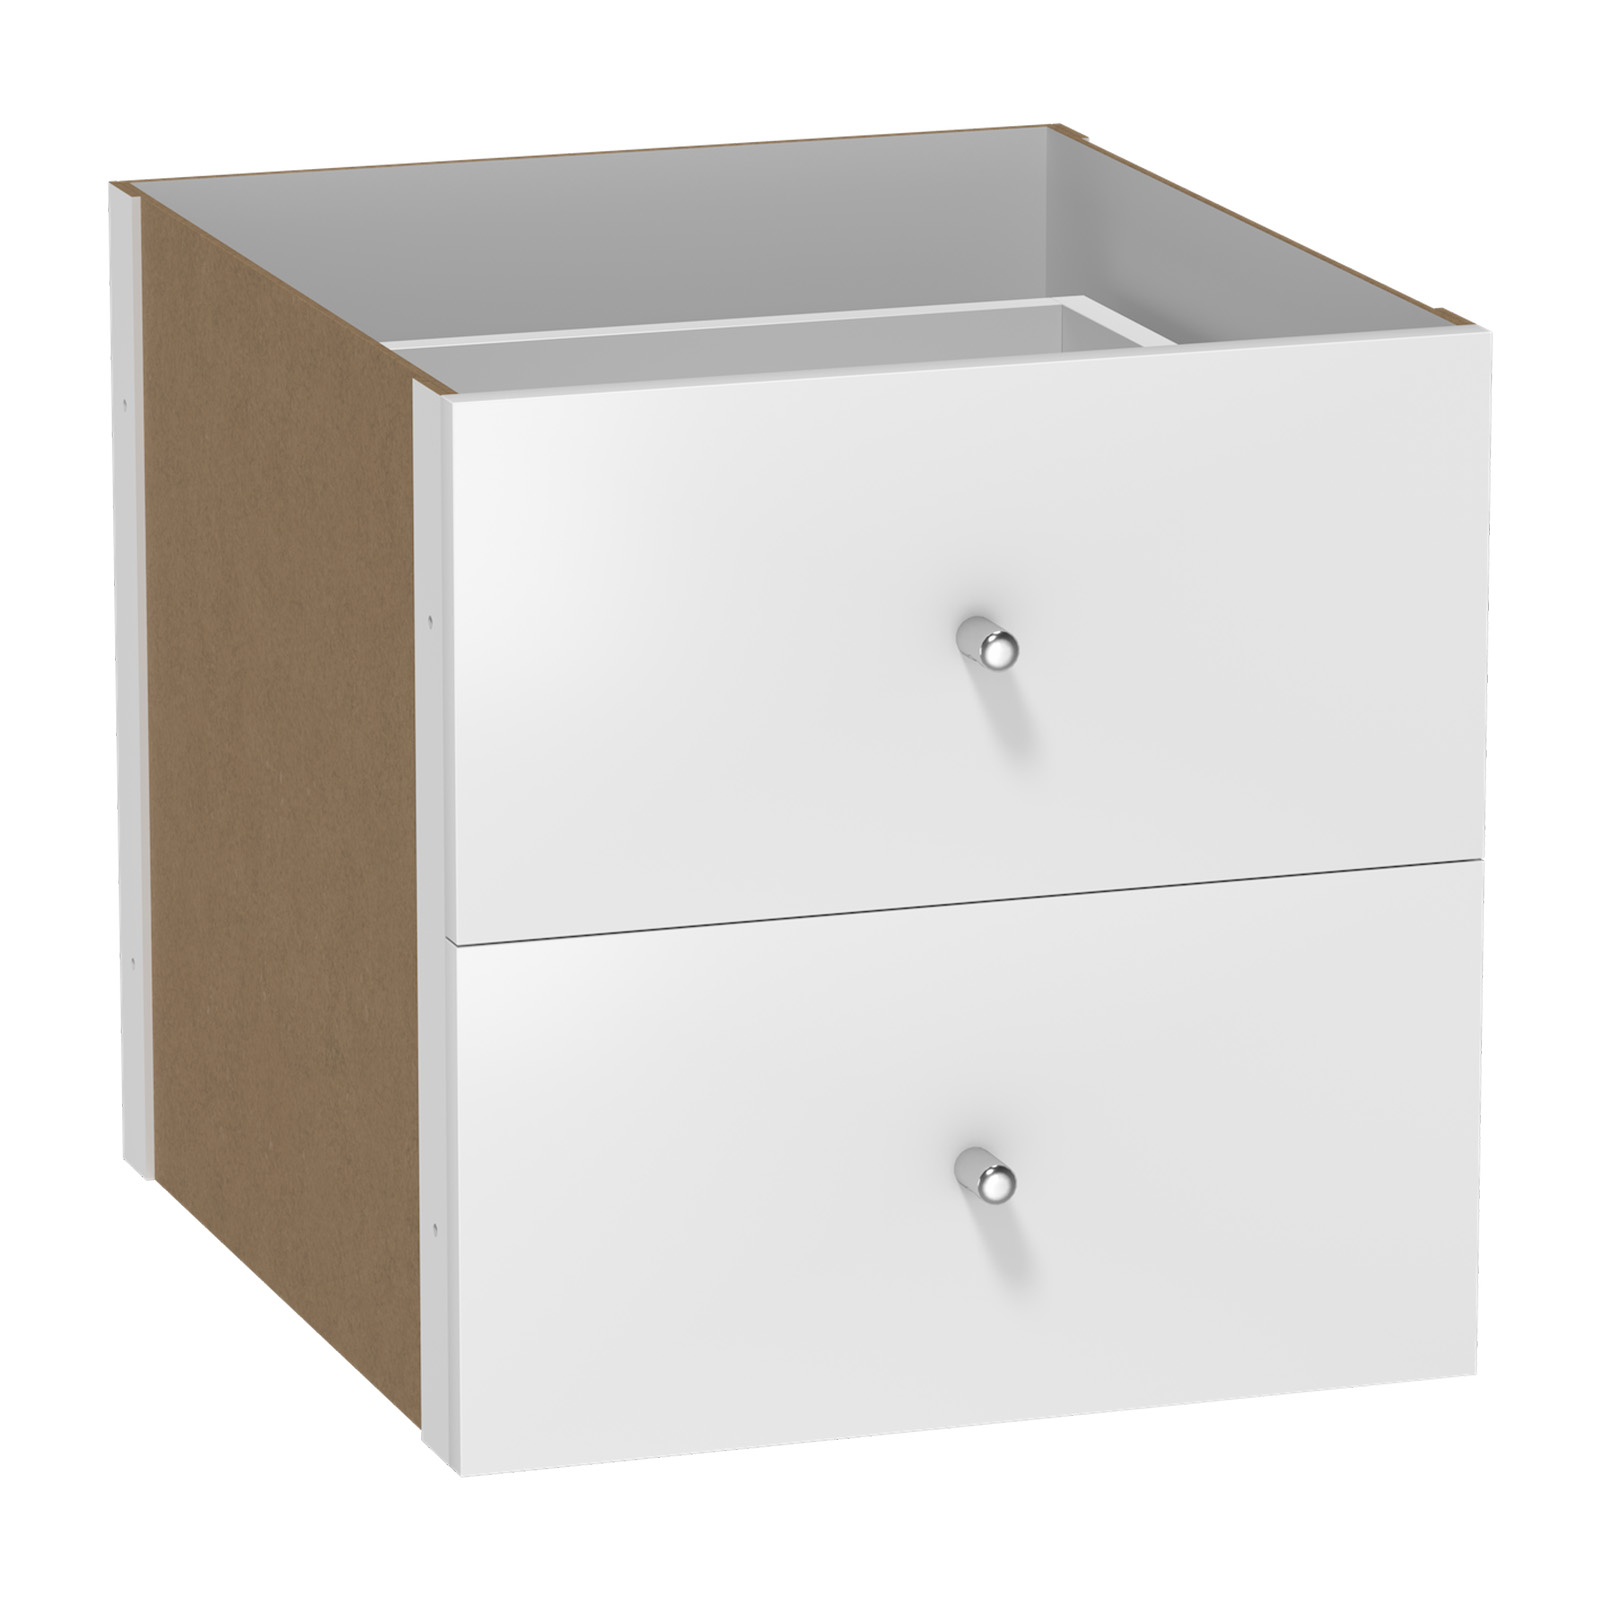 Clever Cube Timber Insert 2 Drawer White High Gloss